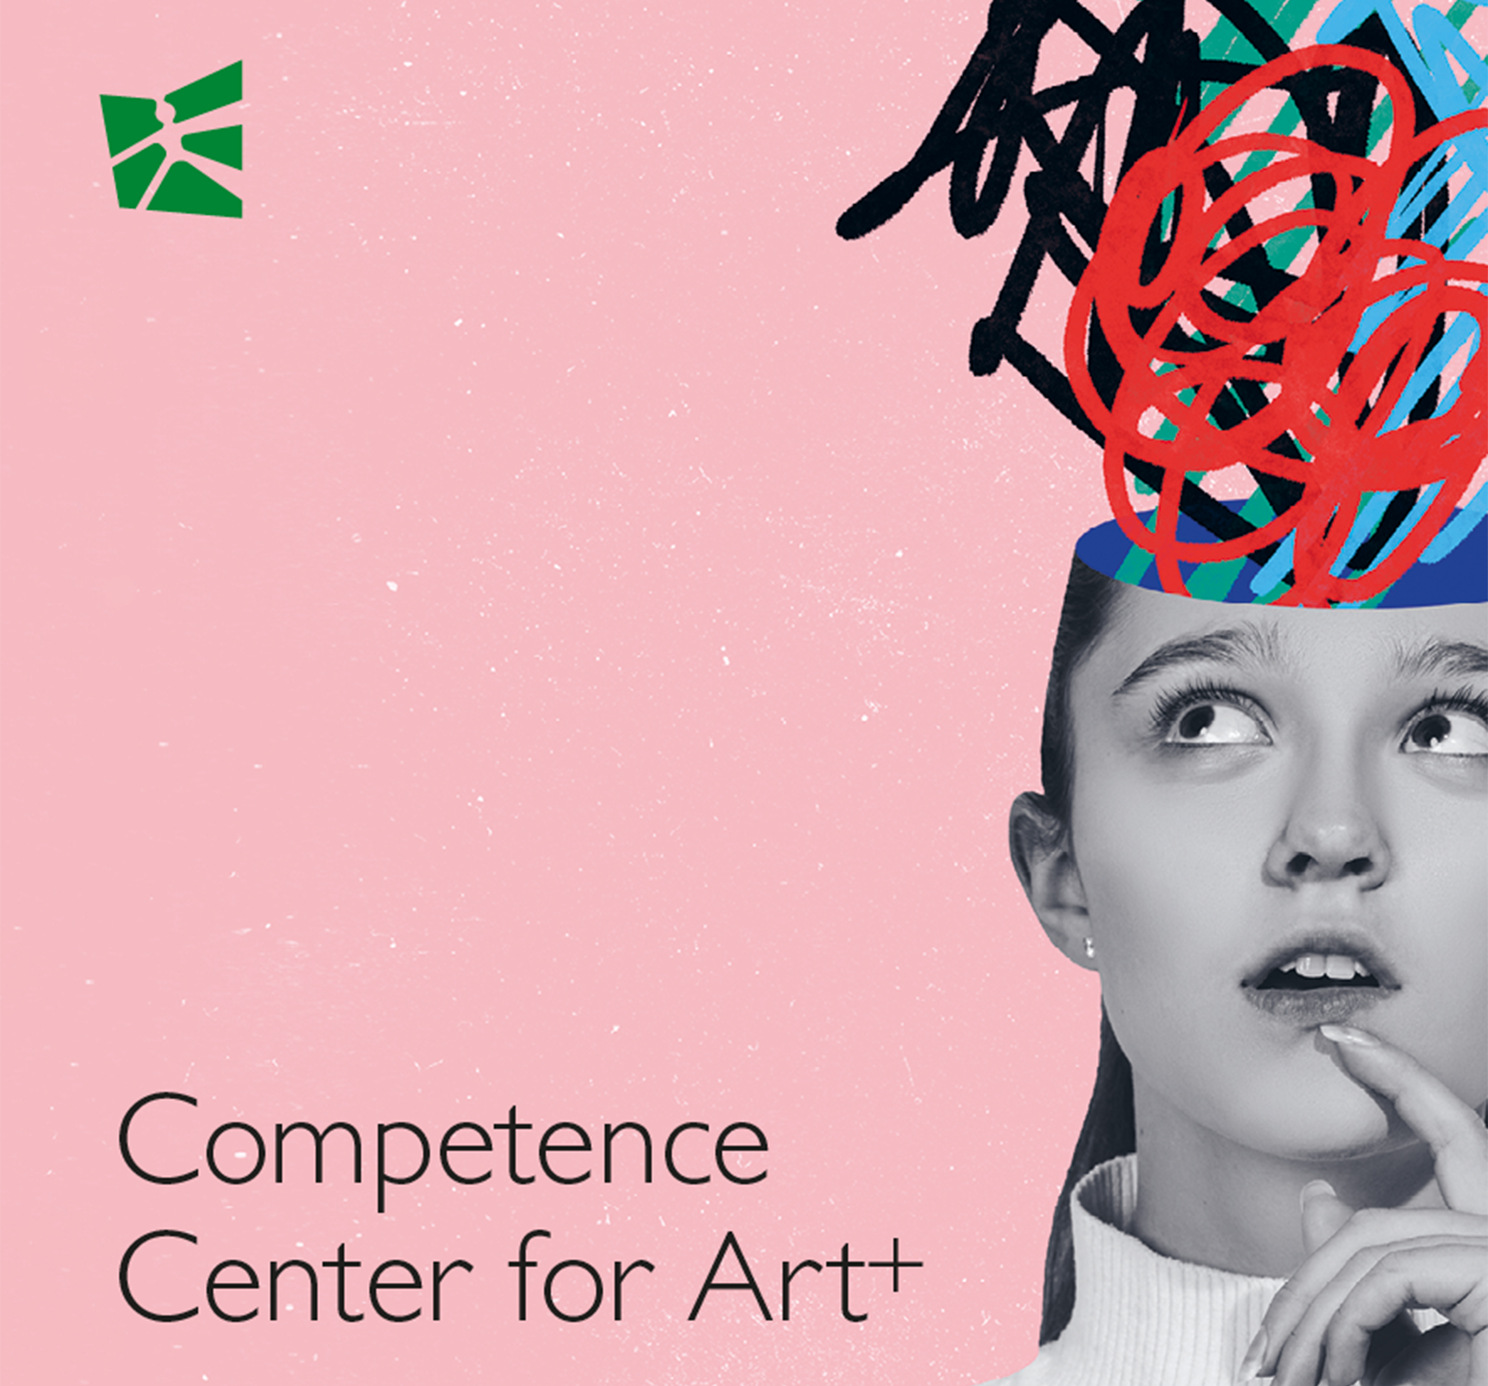 Competence Center for Art+ Key Visual